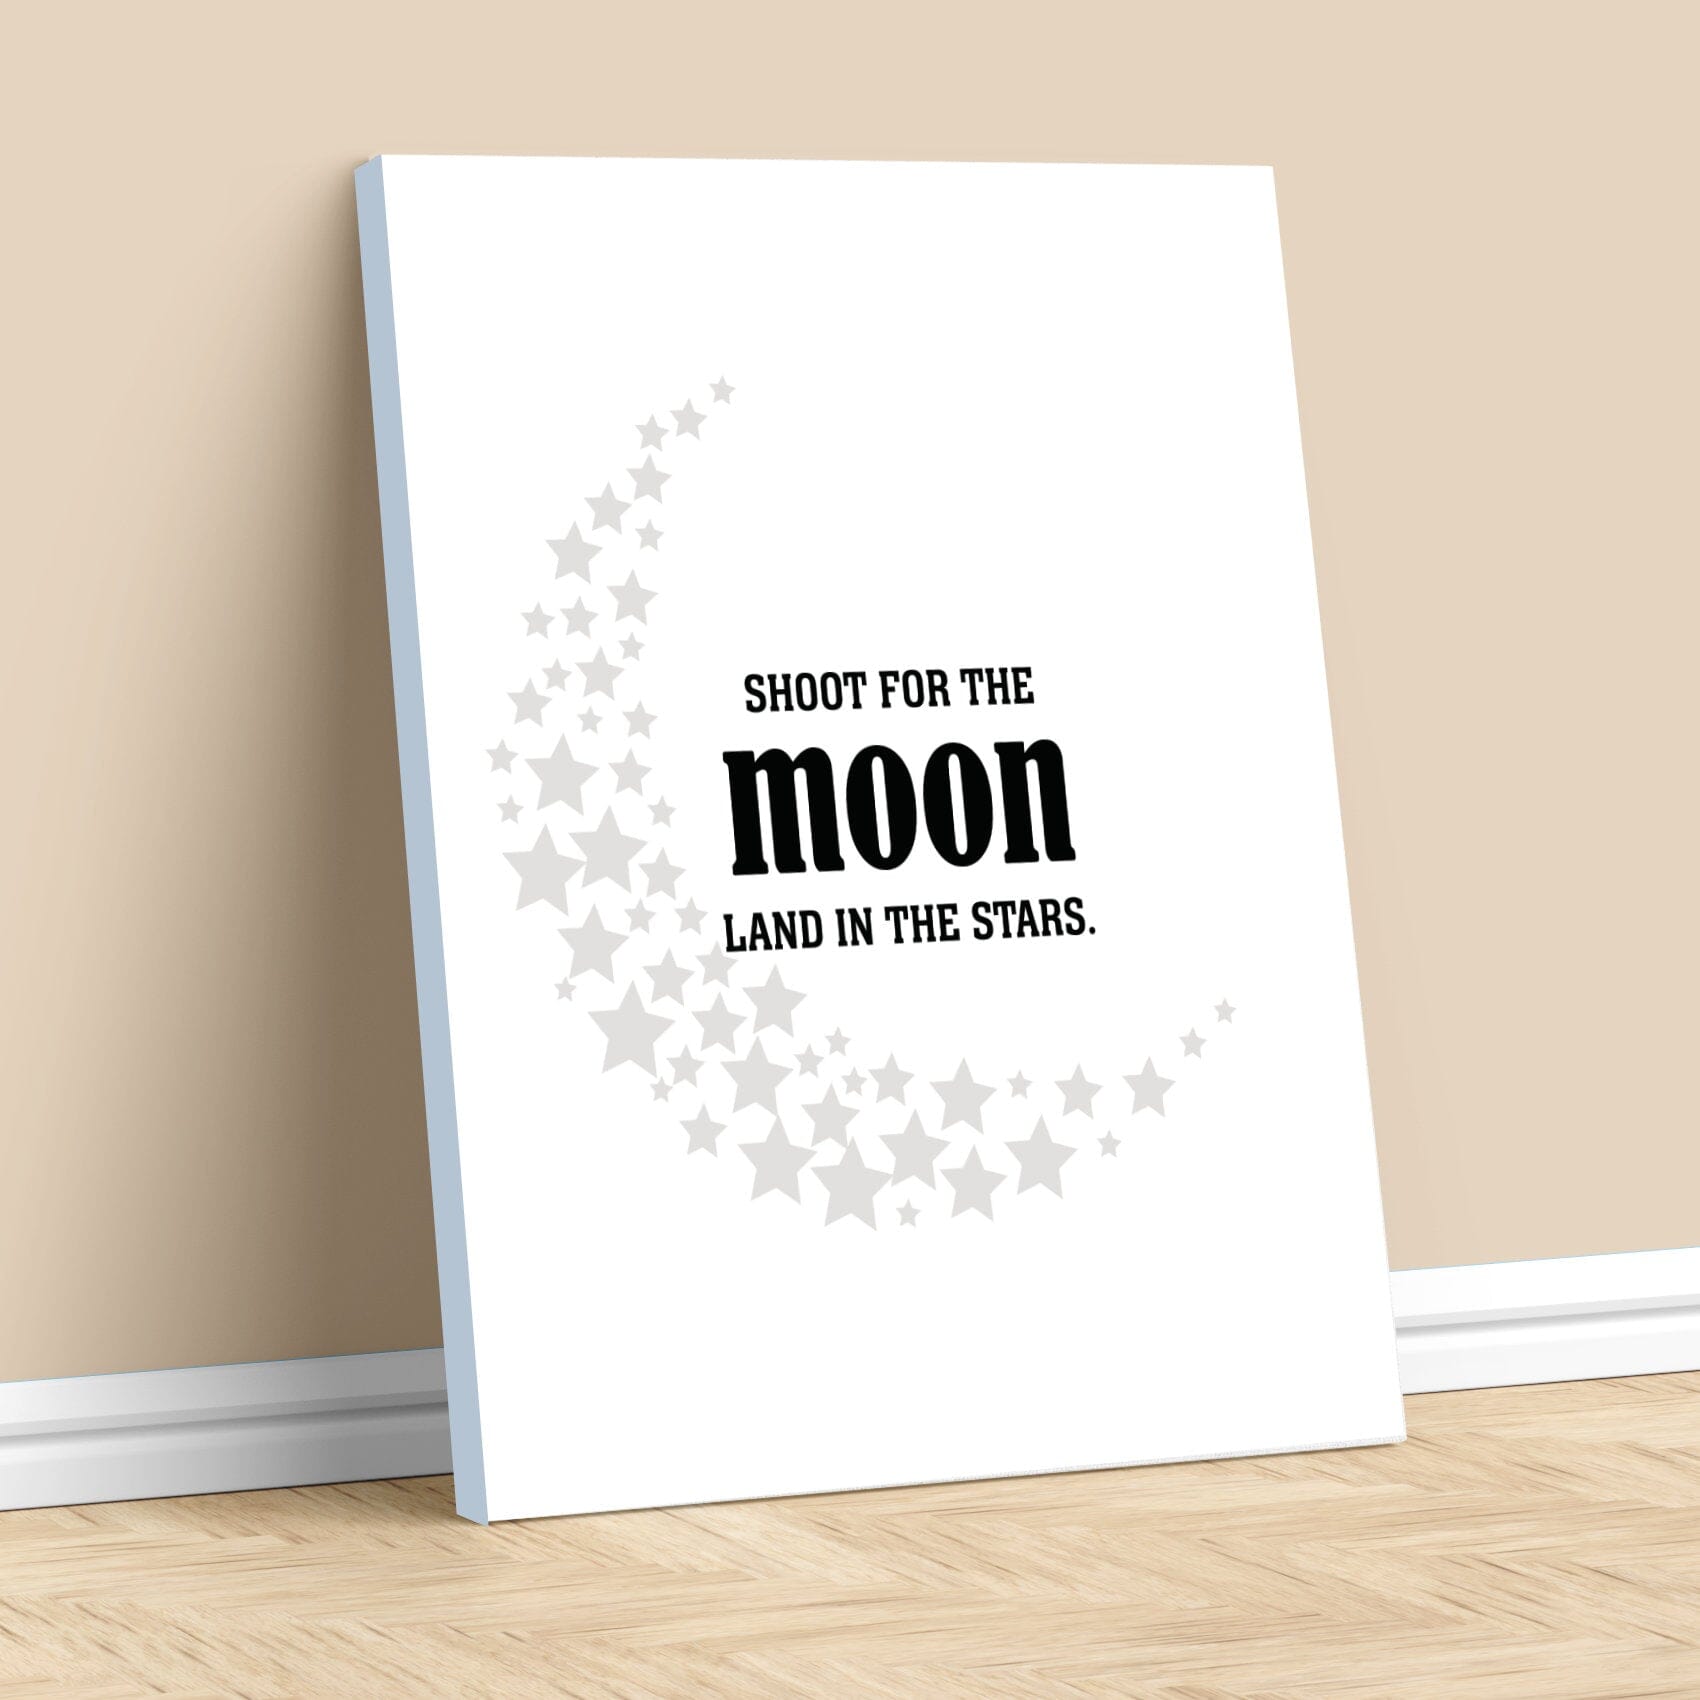 Shoot for the Moon, Land in the Stars - Wise and Witty Print Wise and Wiseass Quotes Song Lyrics Art 11x14 Canvas Wrap 